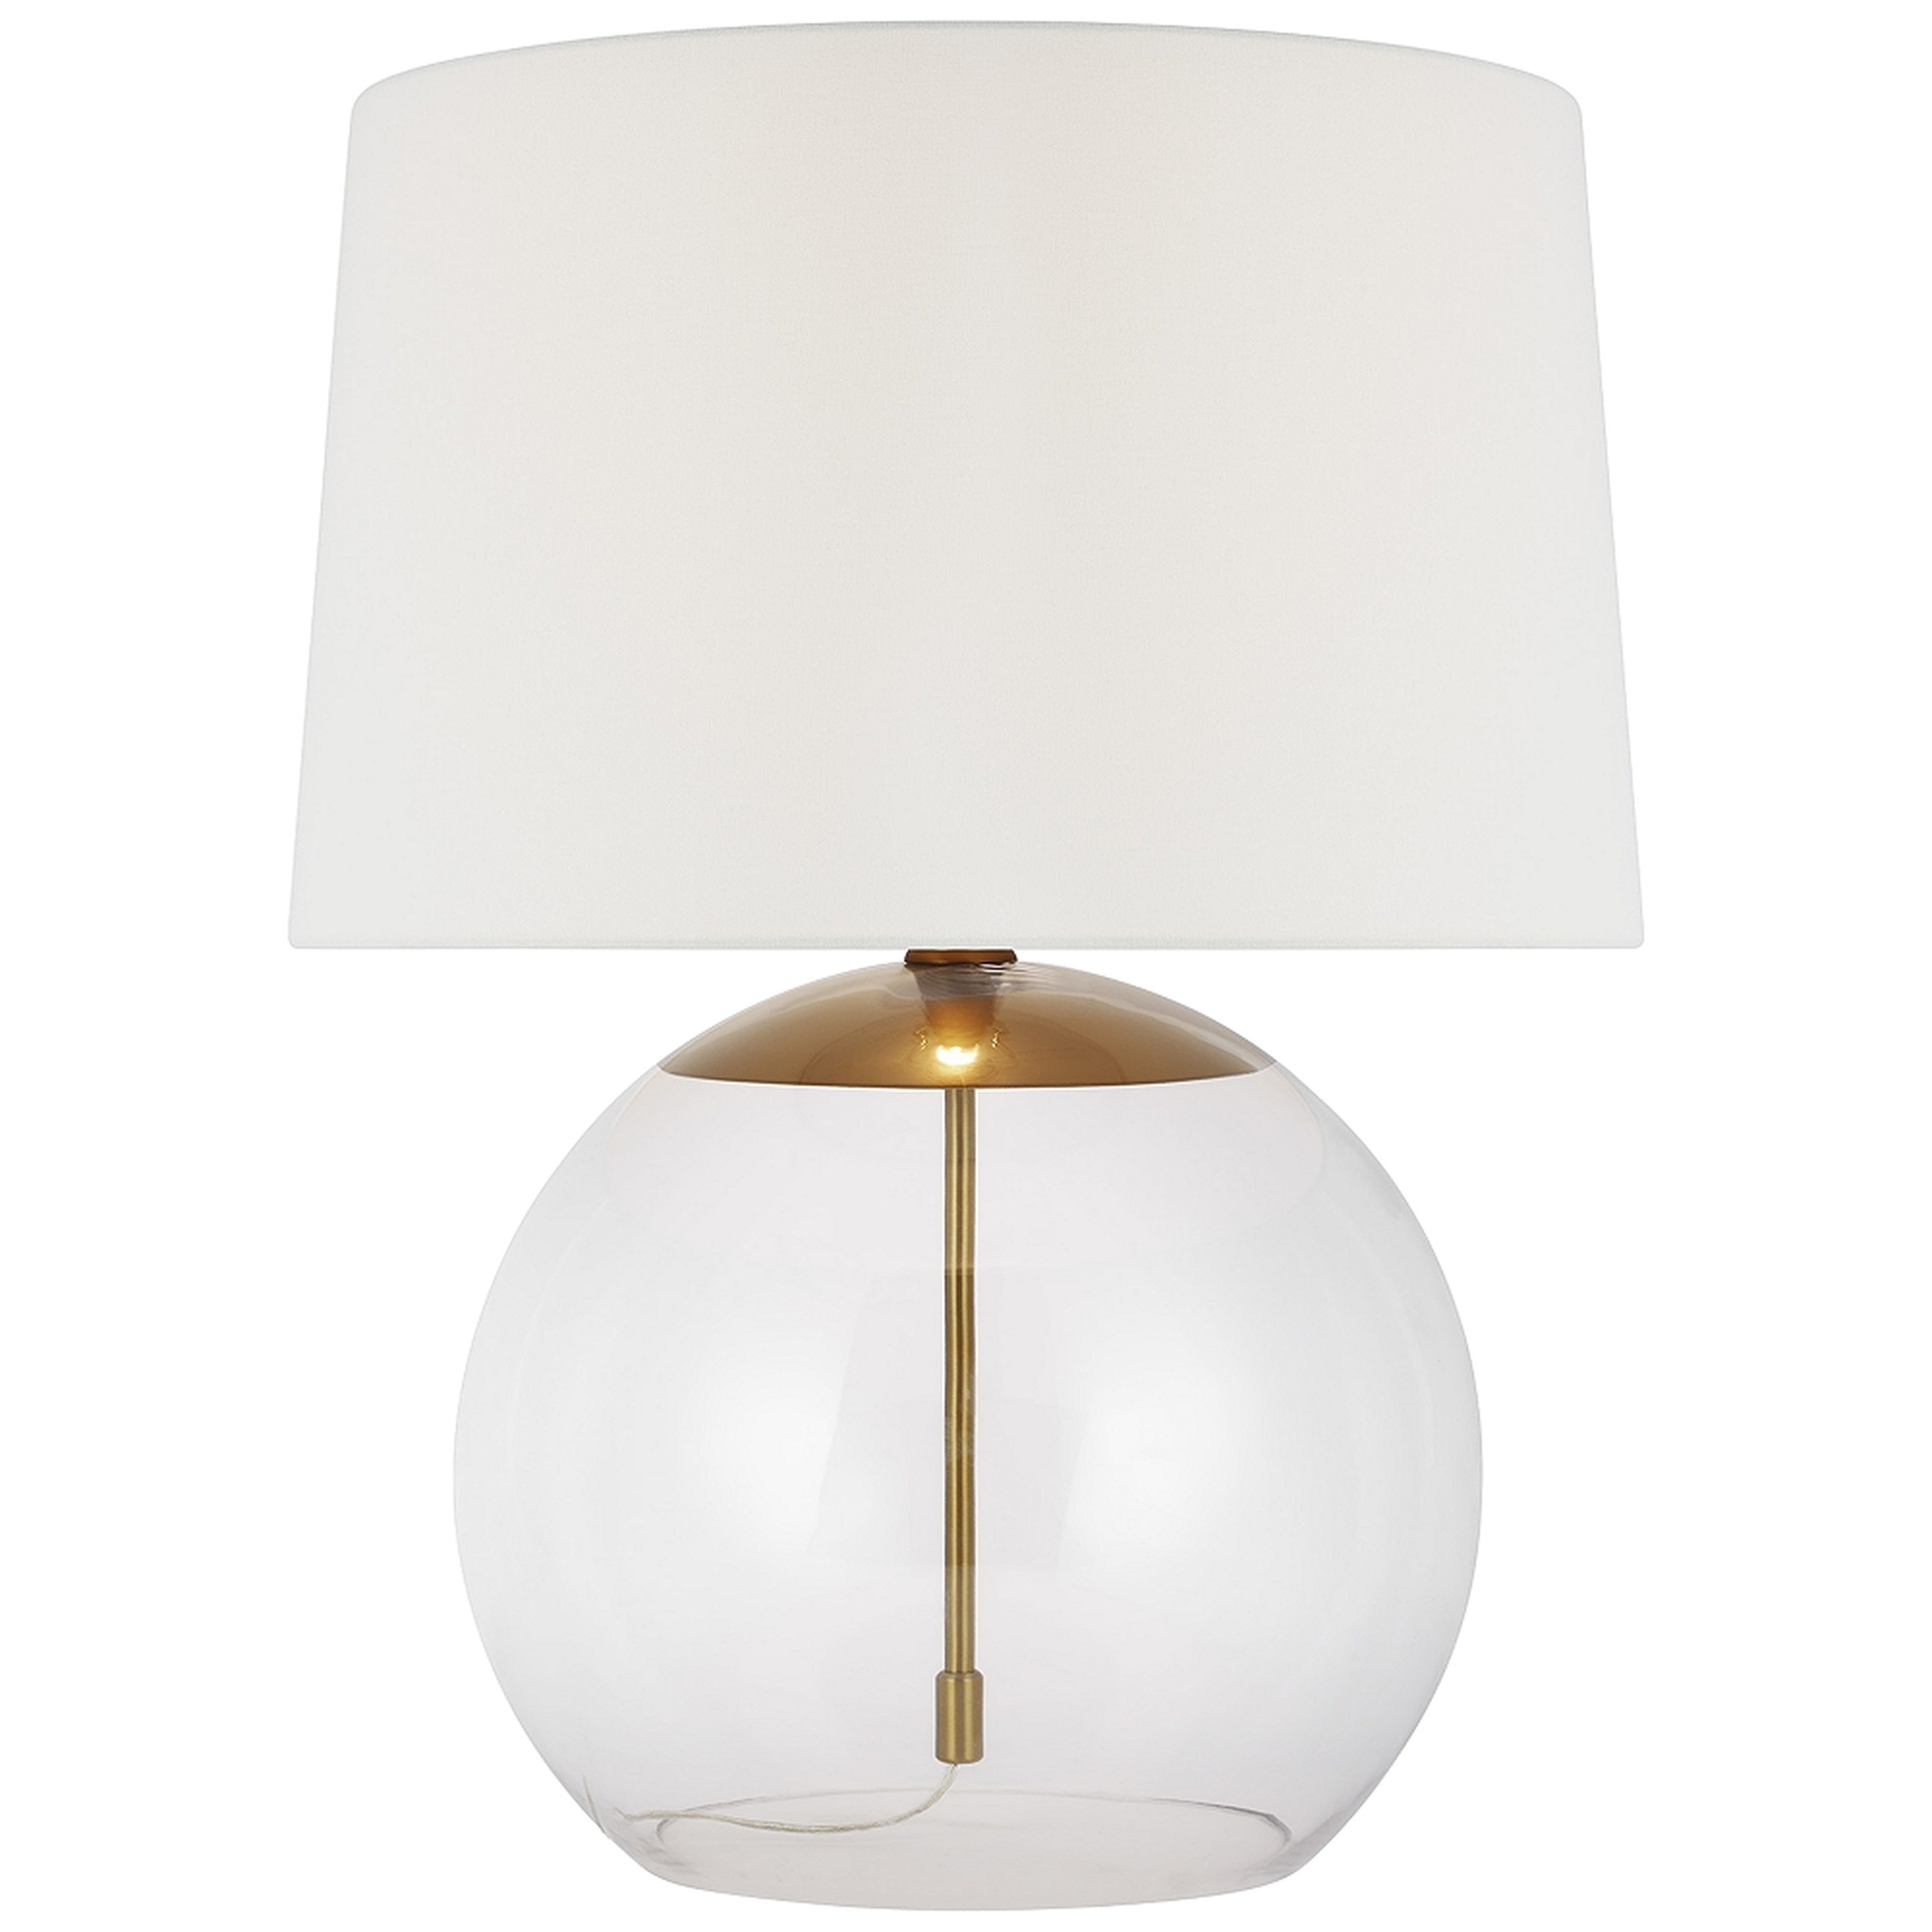 Burnished Brass and Glass Round LED Table Lamp - Style # 97C99 - Lamps Plus